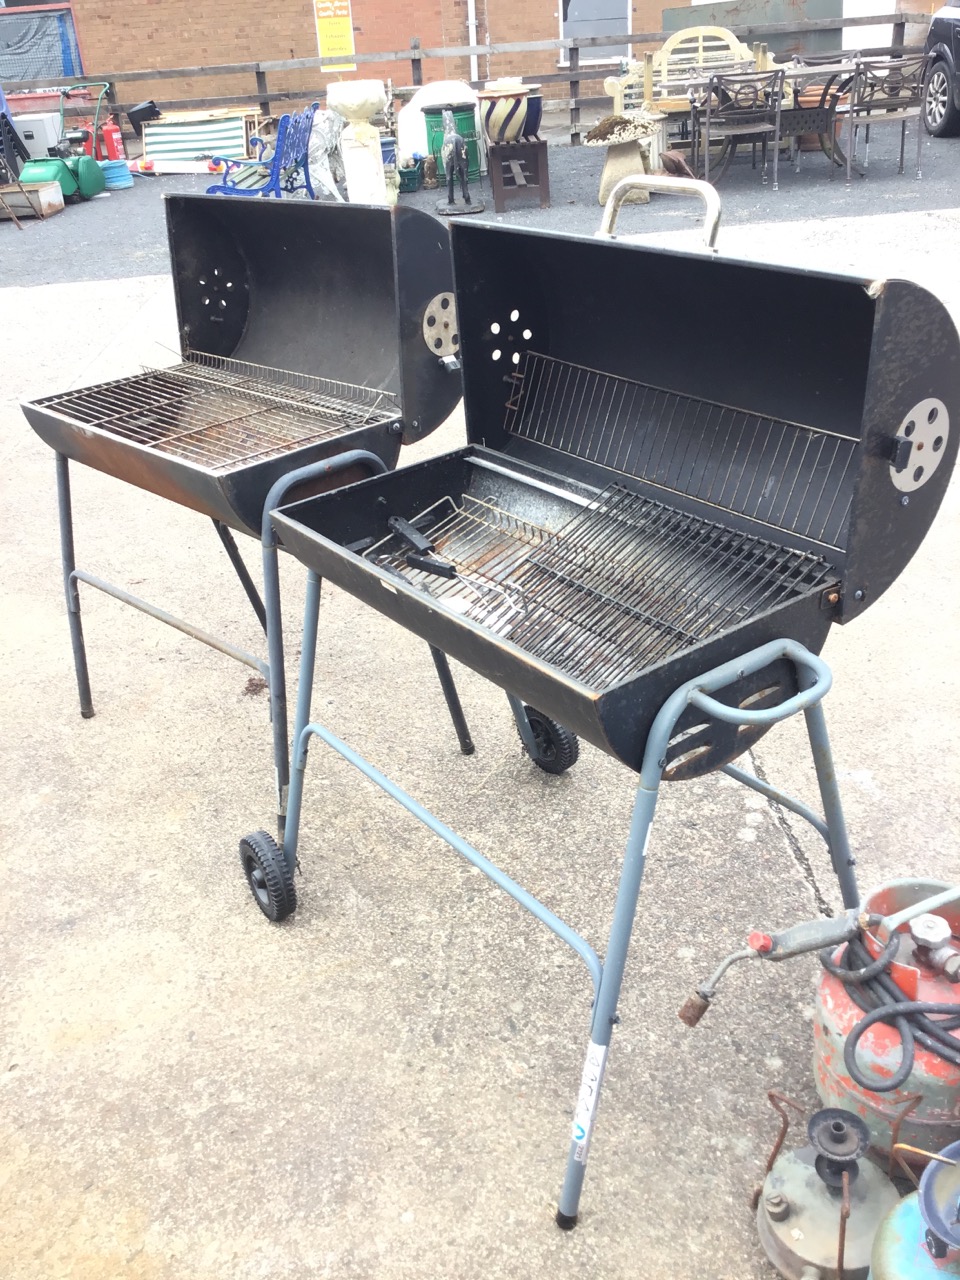 A barrel barbecue with hinged lid revealing grill platform on tubular metal stand with two wheels - Image 2 of 3